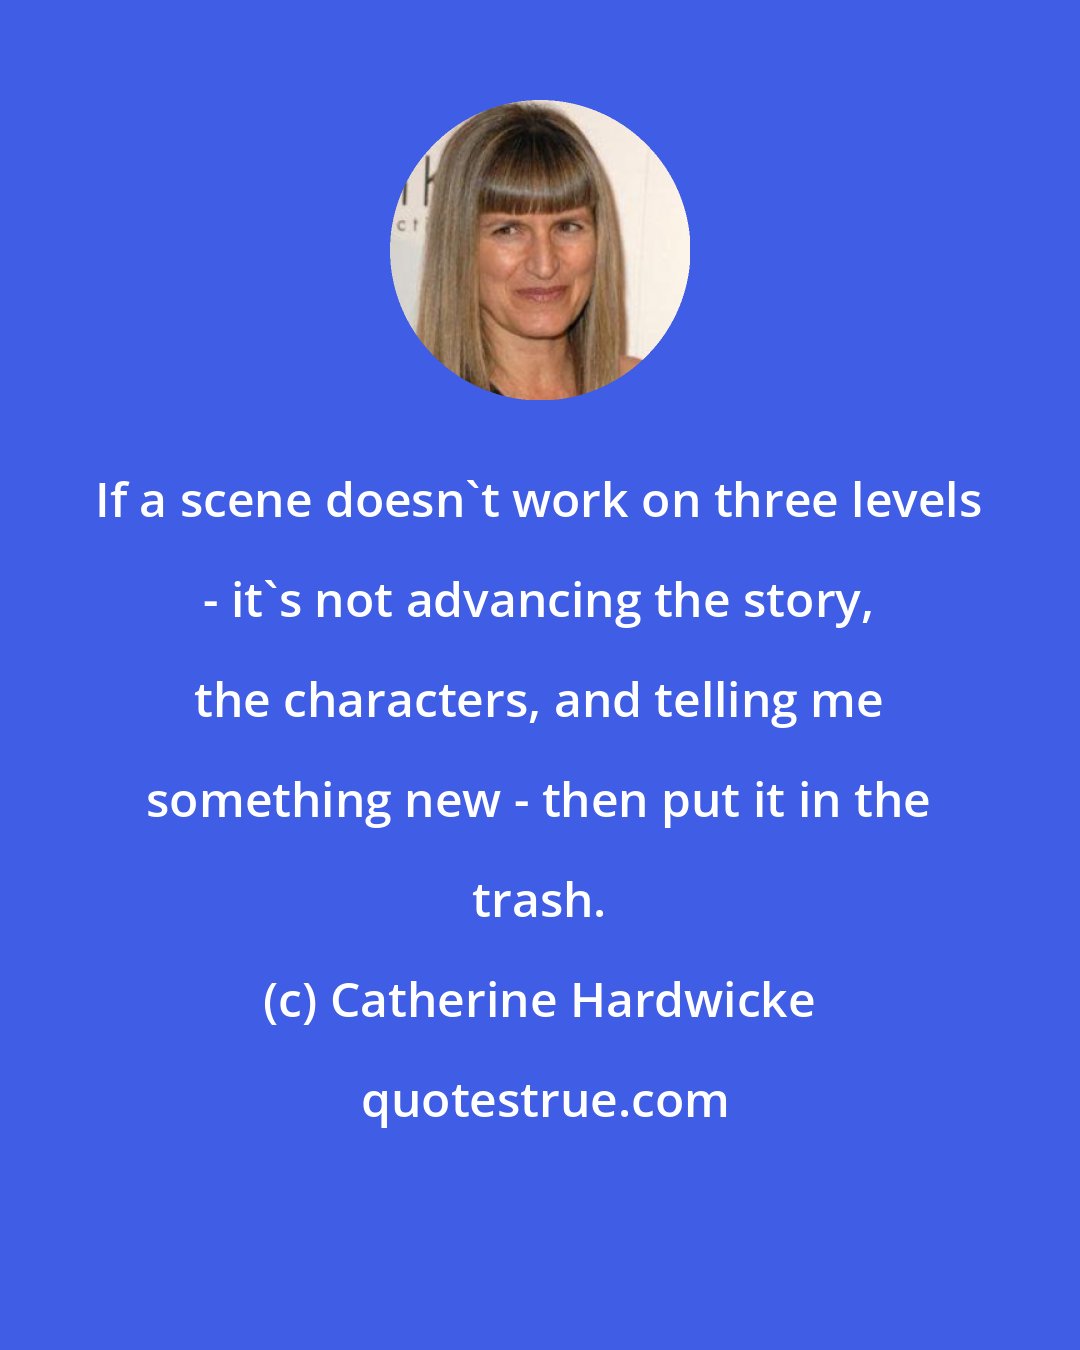 Catherine Hardwicke: If a scene doesn't work on three levels - it's not advancing the story, the characters, and telling me something new - then put it in the trash.